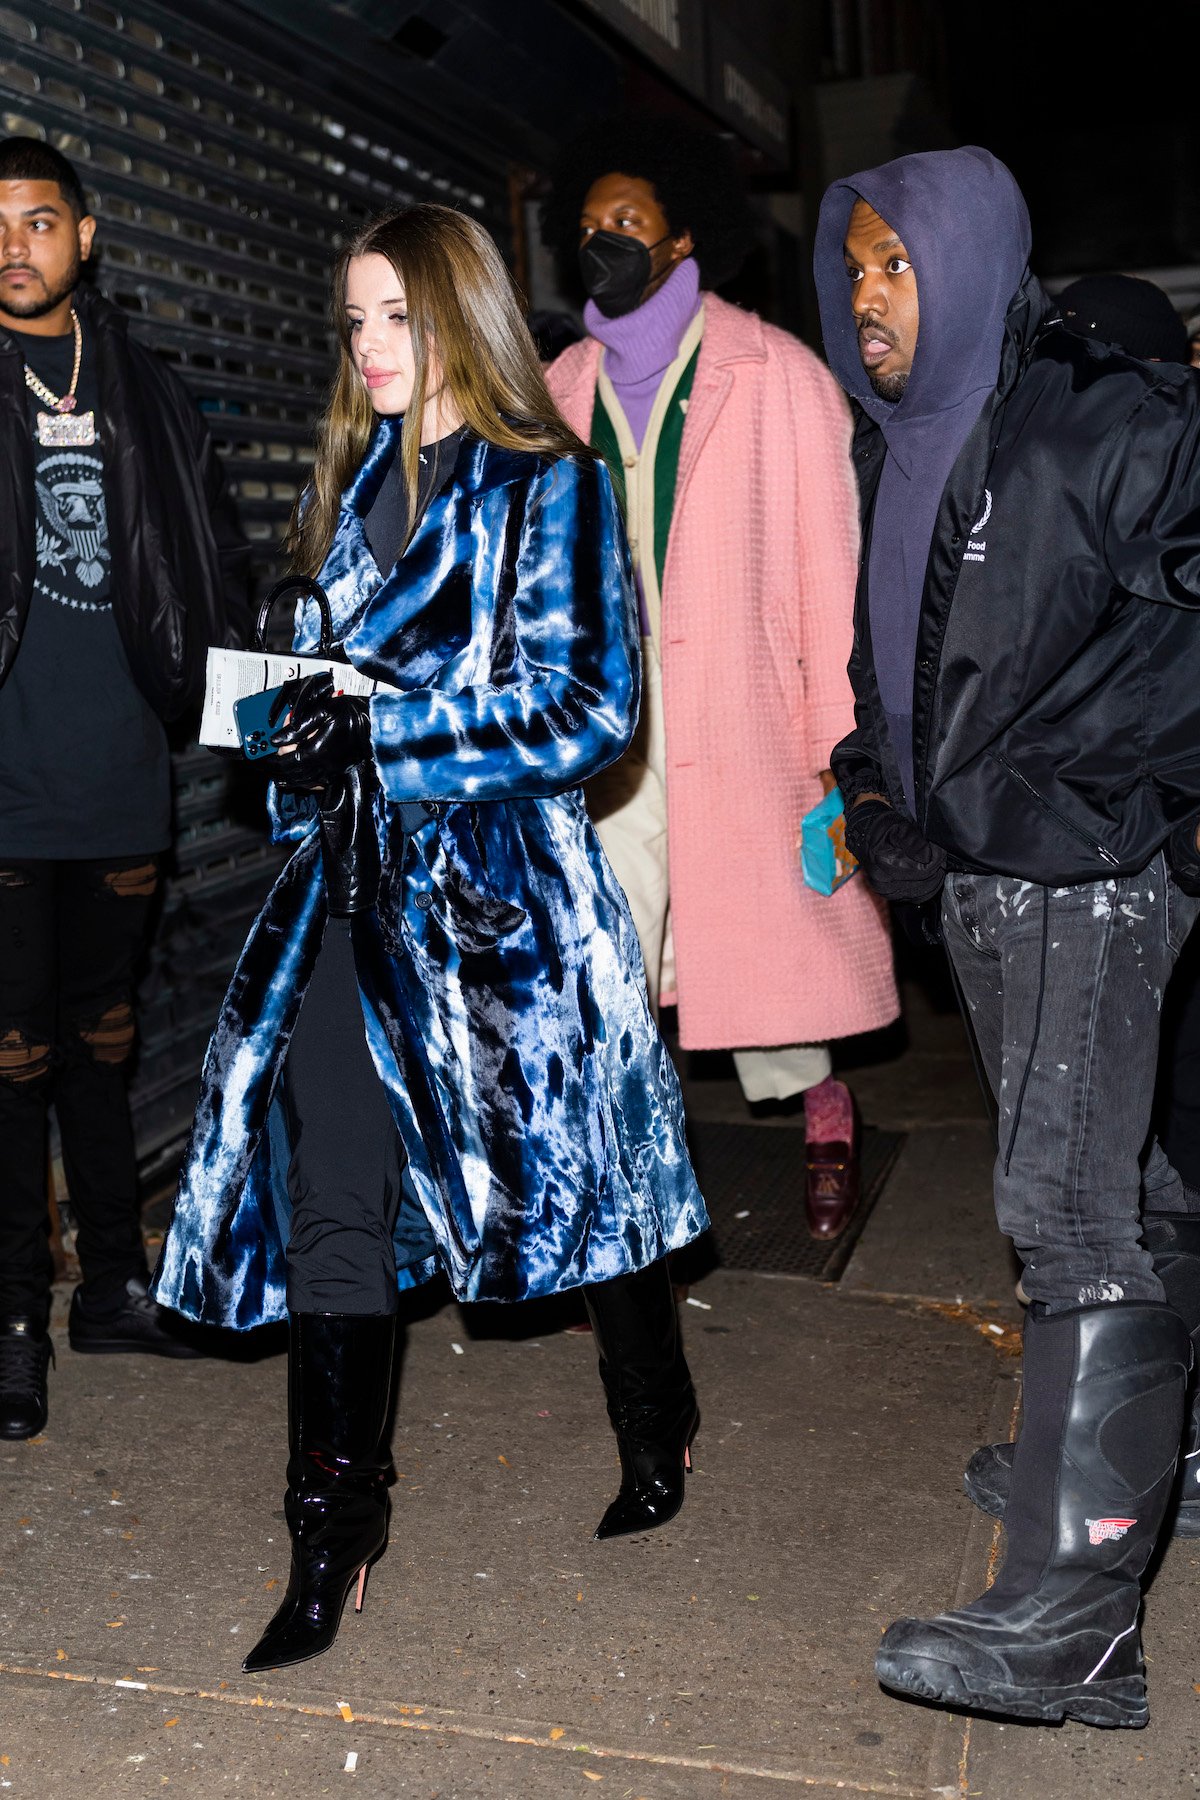 Julia Fox and Kanye West walk together on a date in New York.